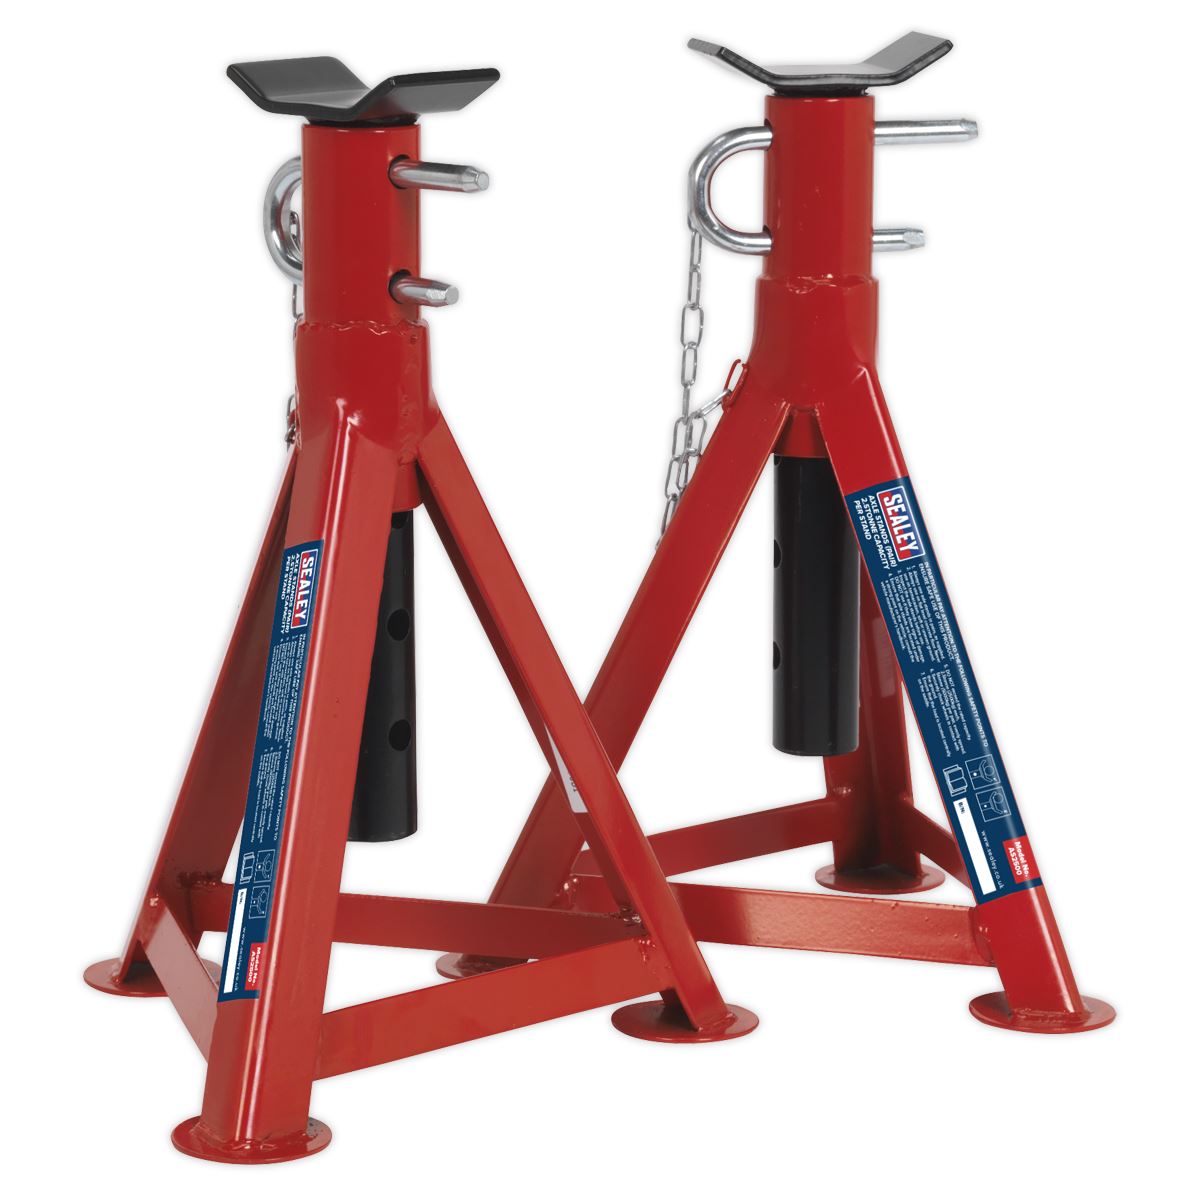 Sealey Premier Axle Stands (Pair) 2.5 Tonne Capacity per Stand